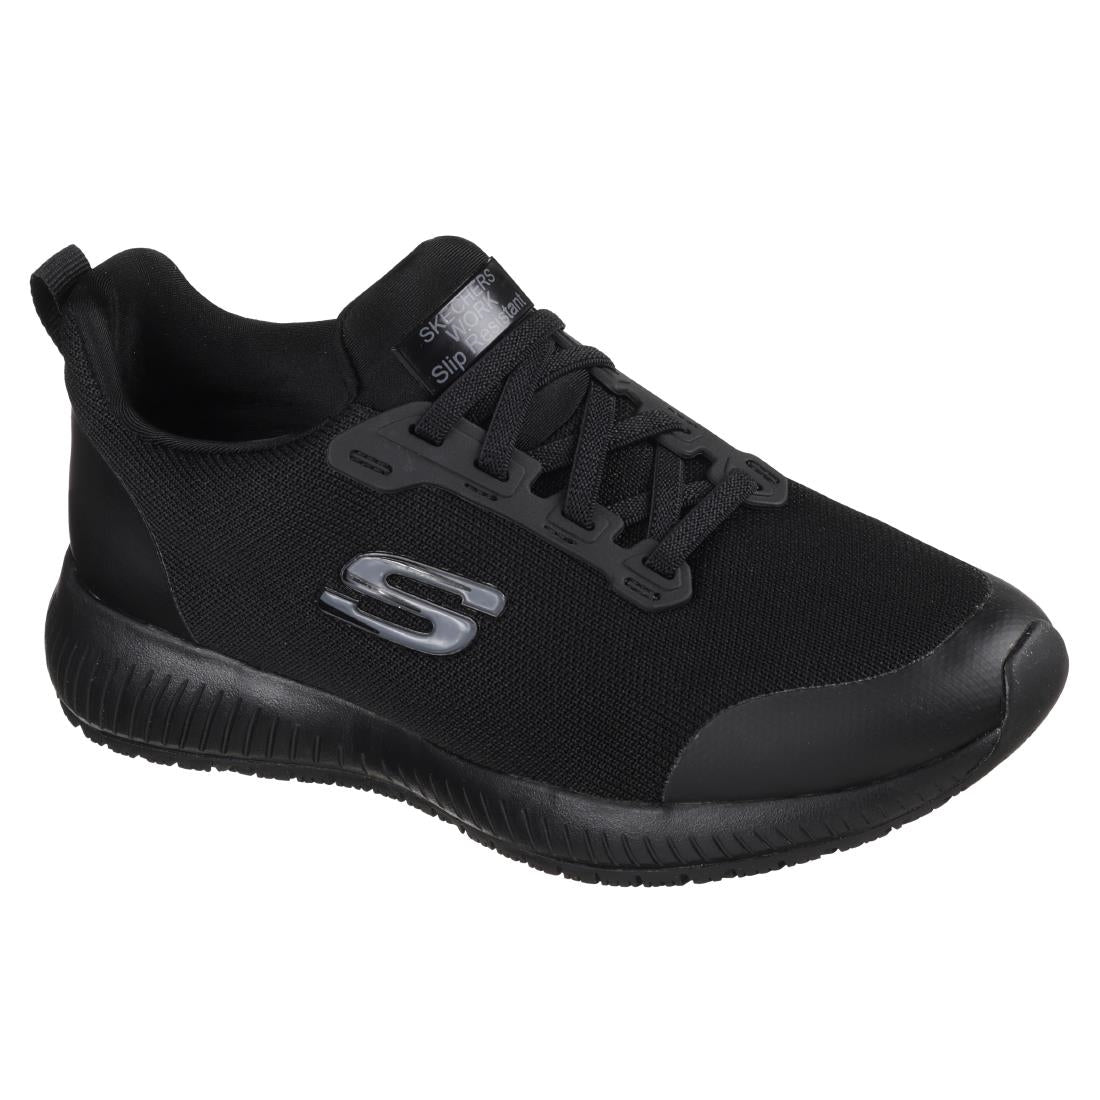 BB672-38 Skechers Womens Slip Resistant Squad Trainer Size 38 JD Catering Equipment Solutions Ltd